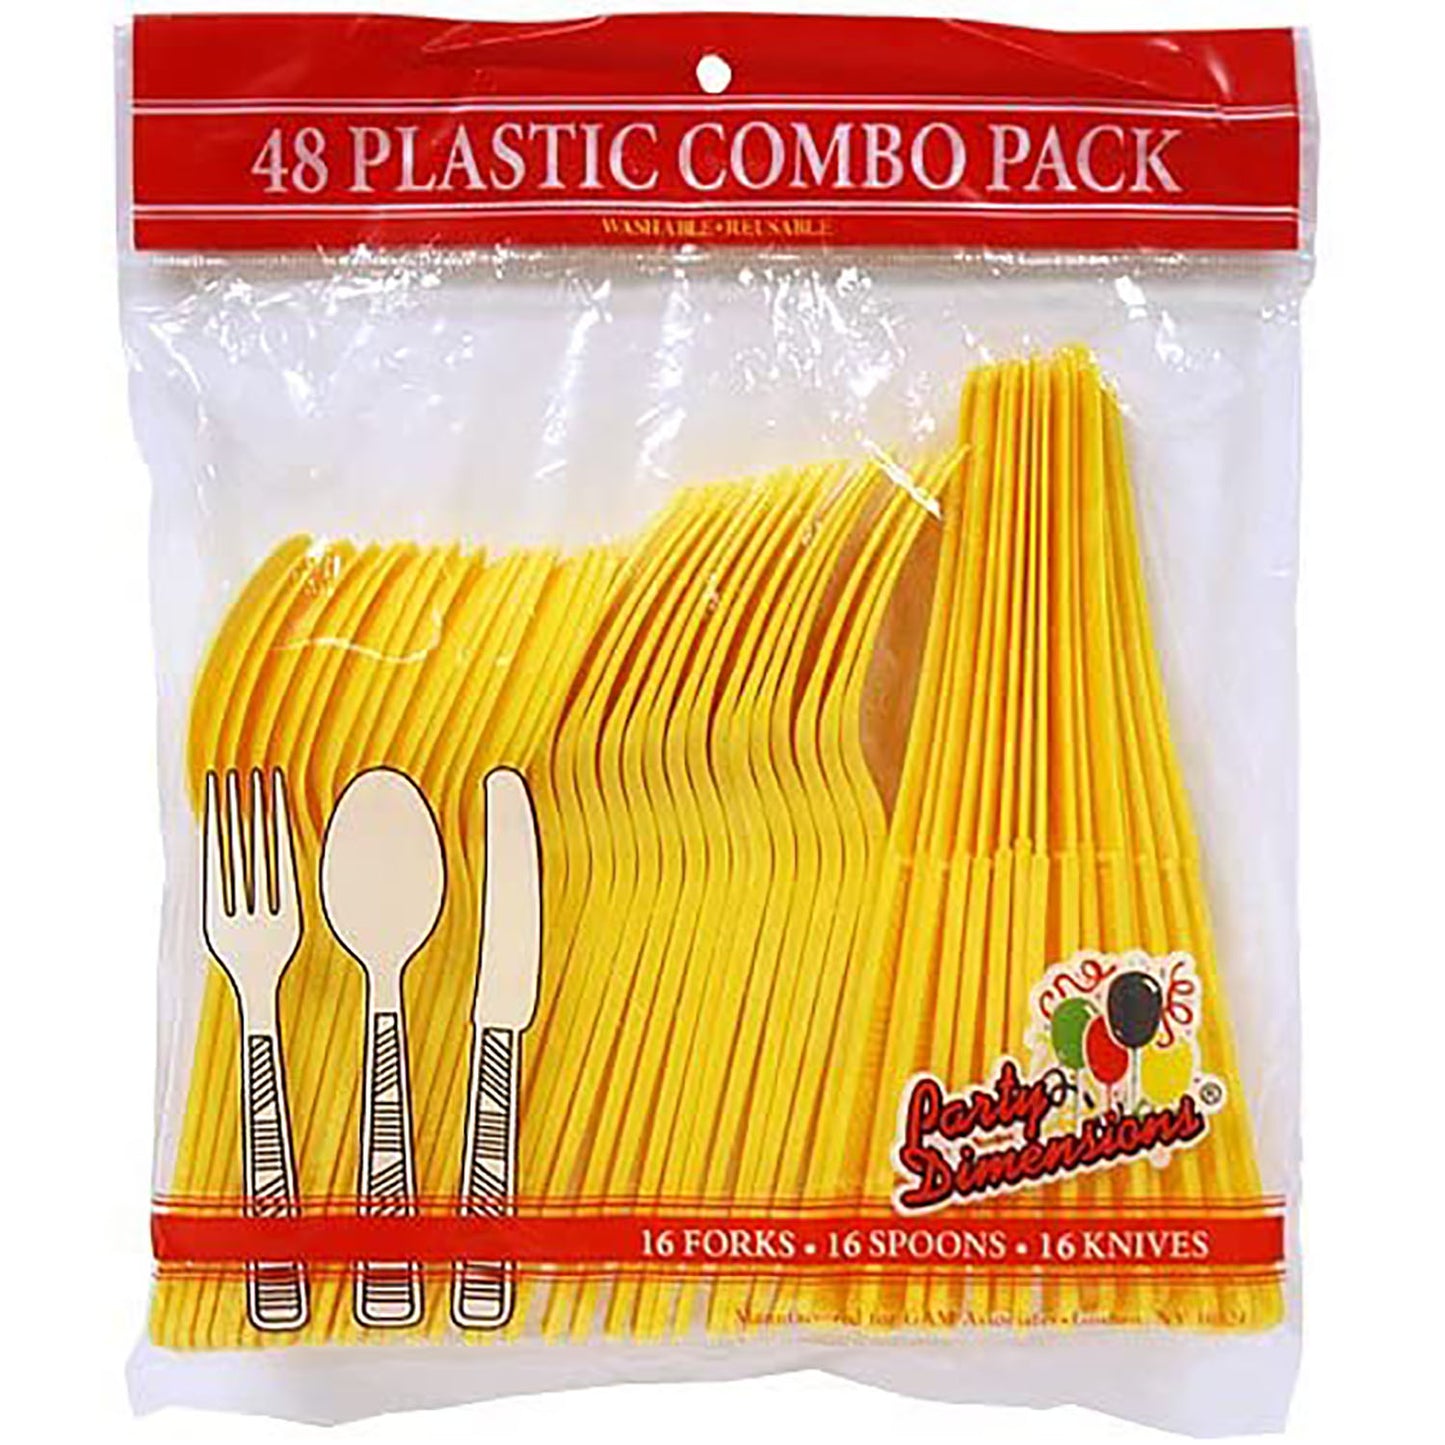 Sunshine Yellow Combo Cutlery Cutlery Party Dimensions   